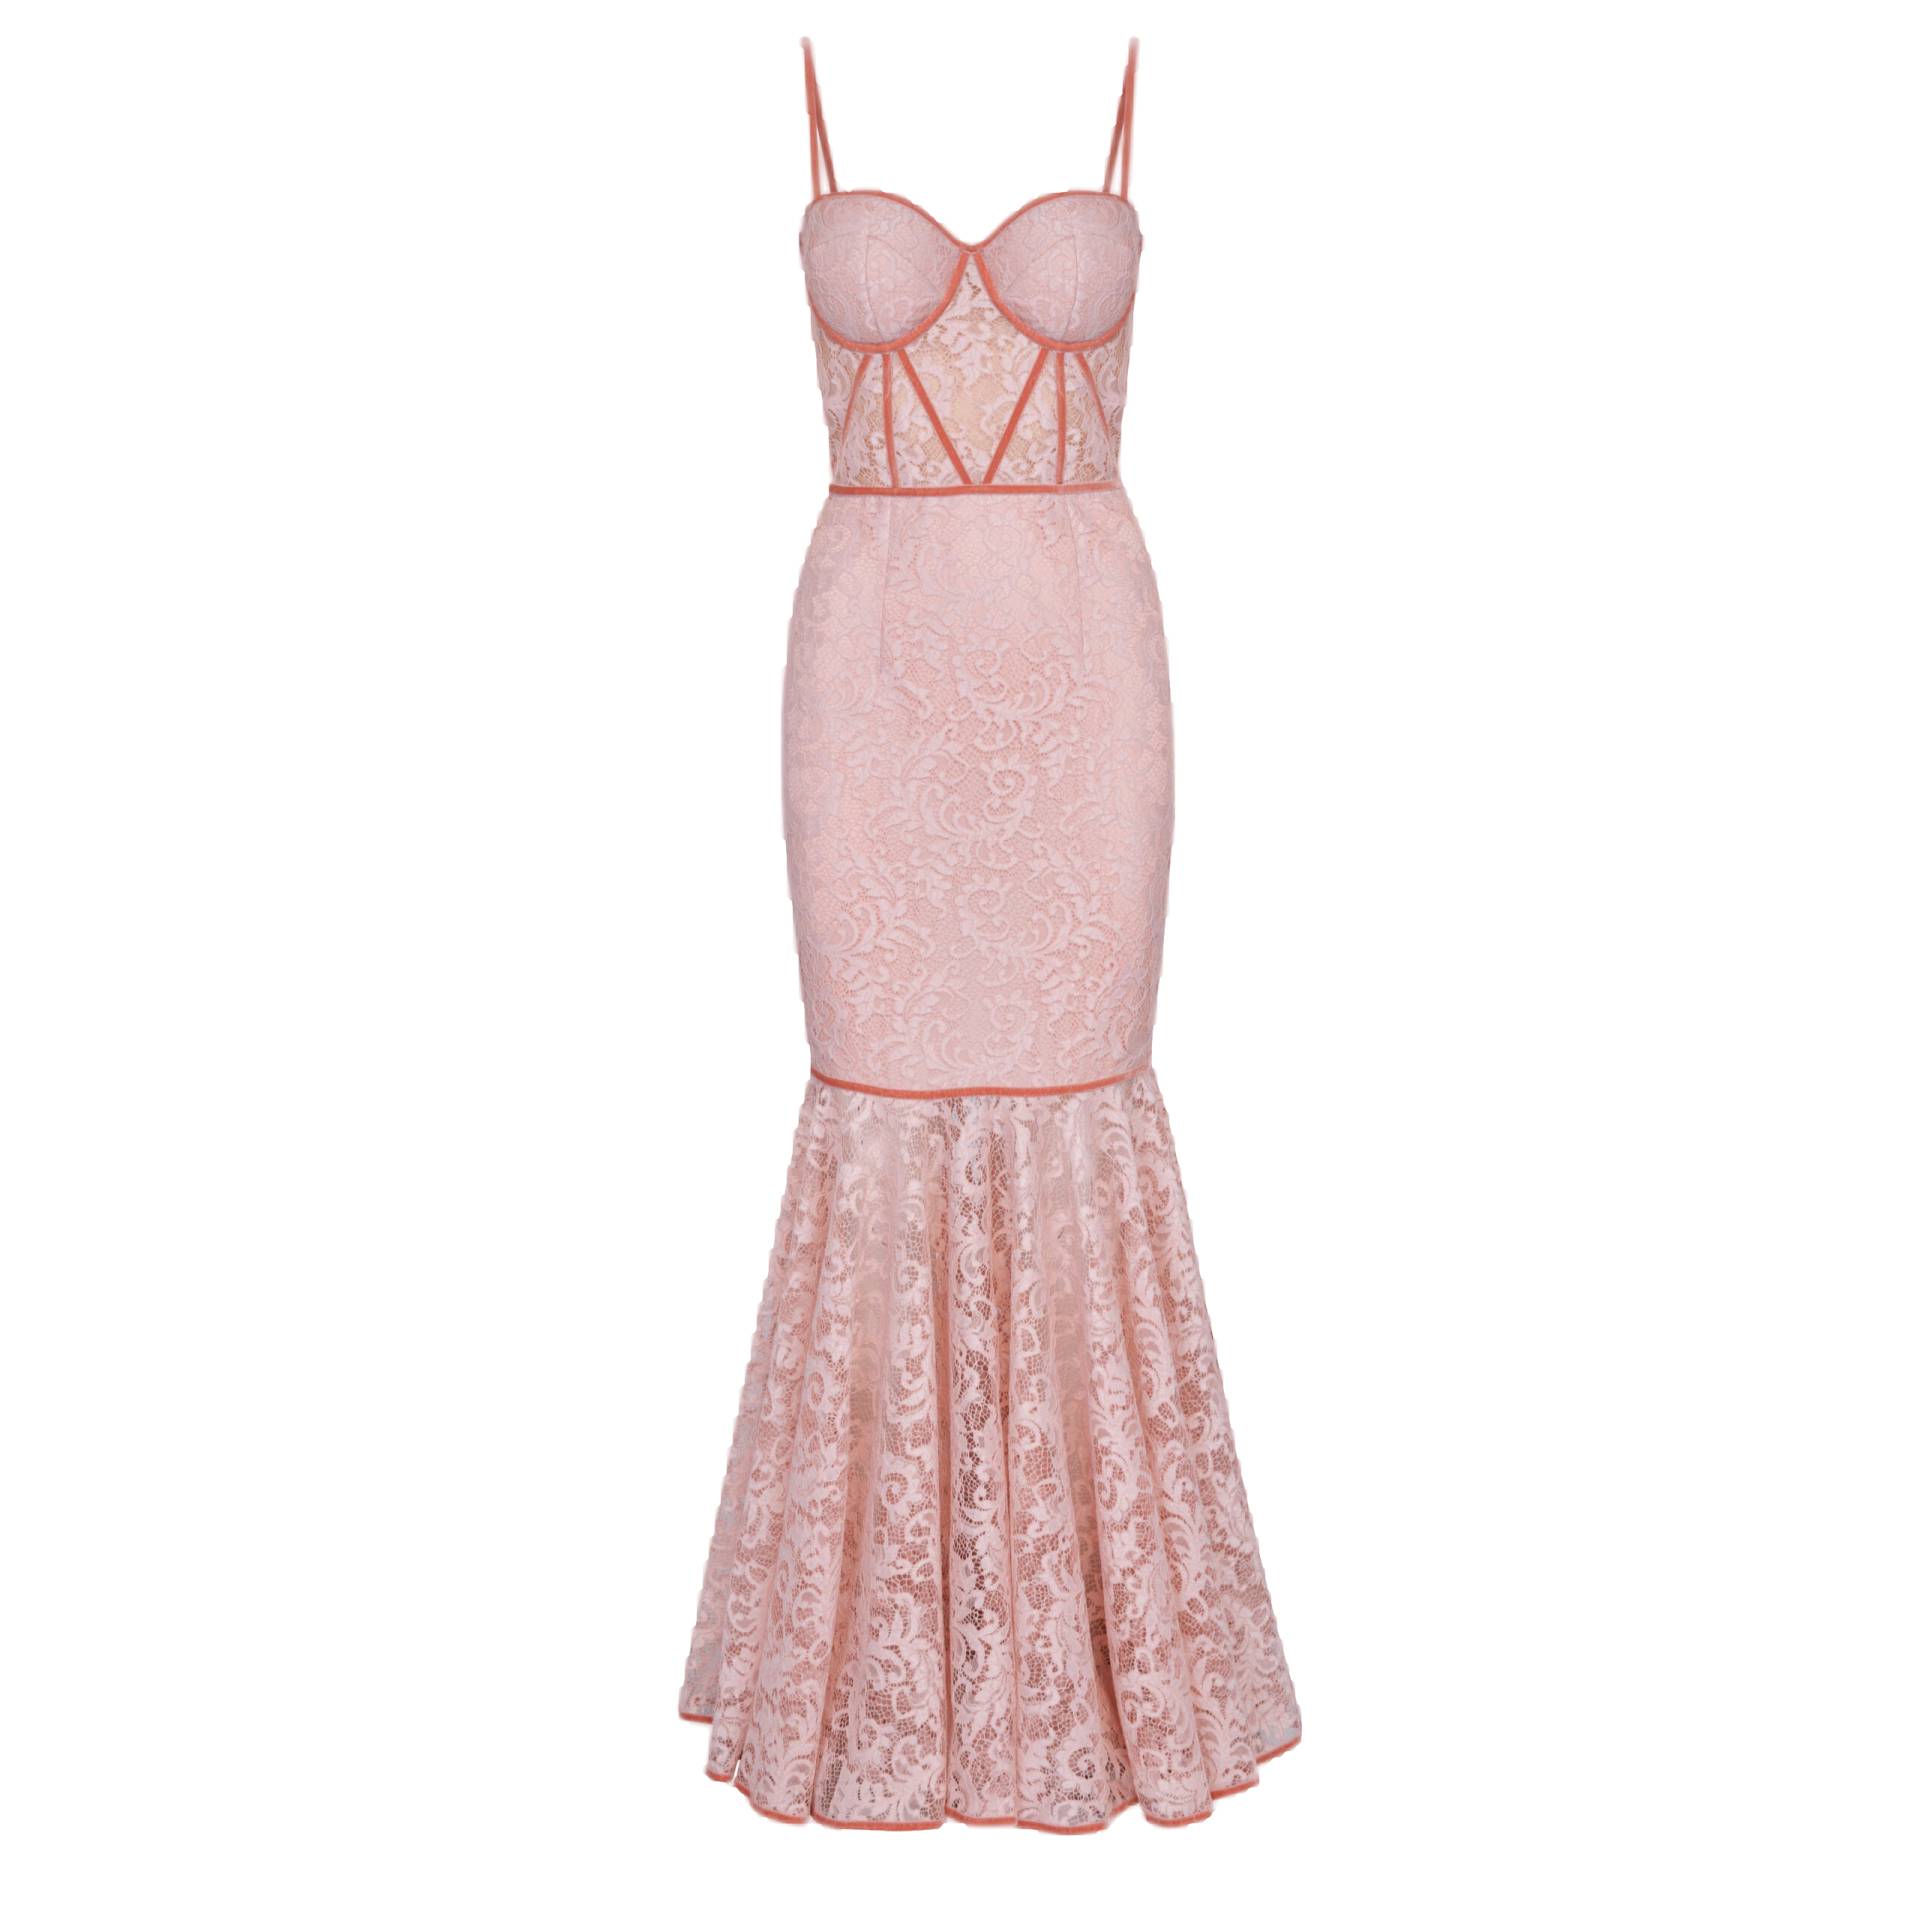 Sensual lace dress von Lily Was Here